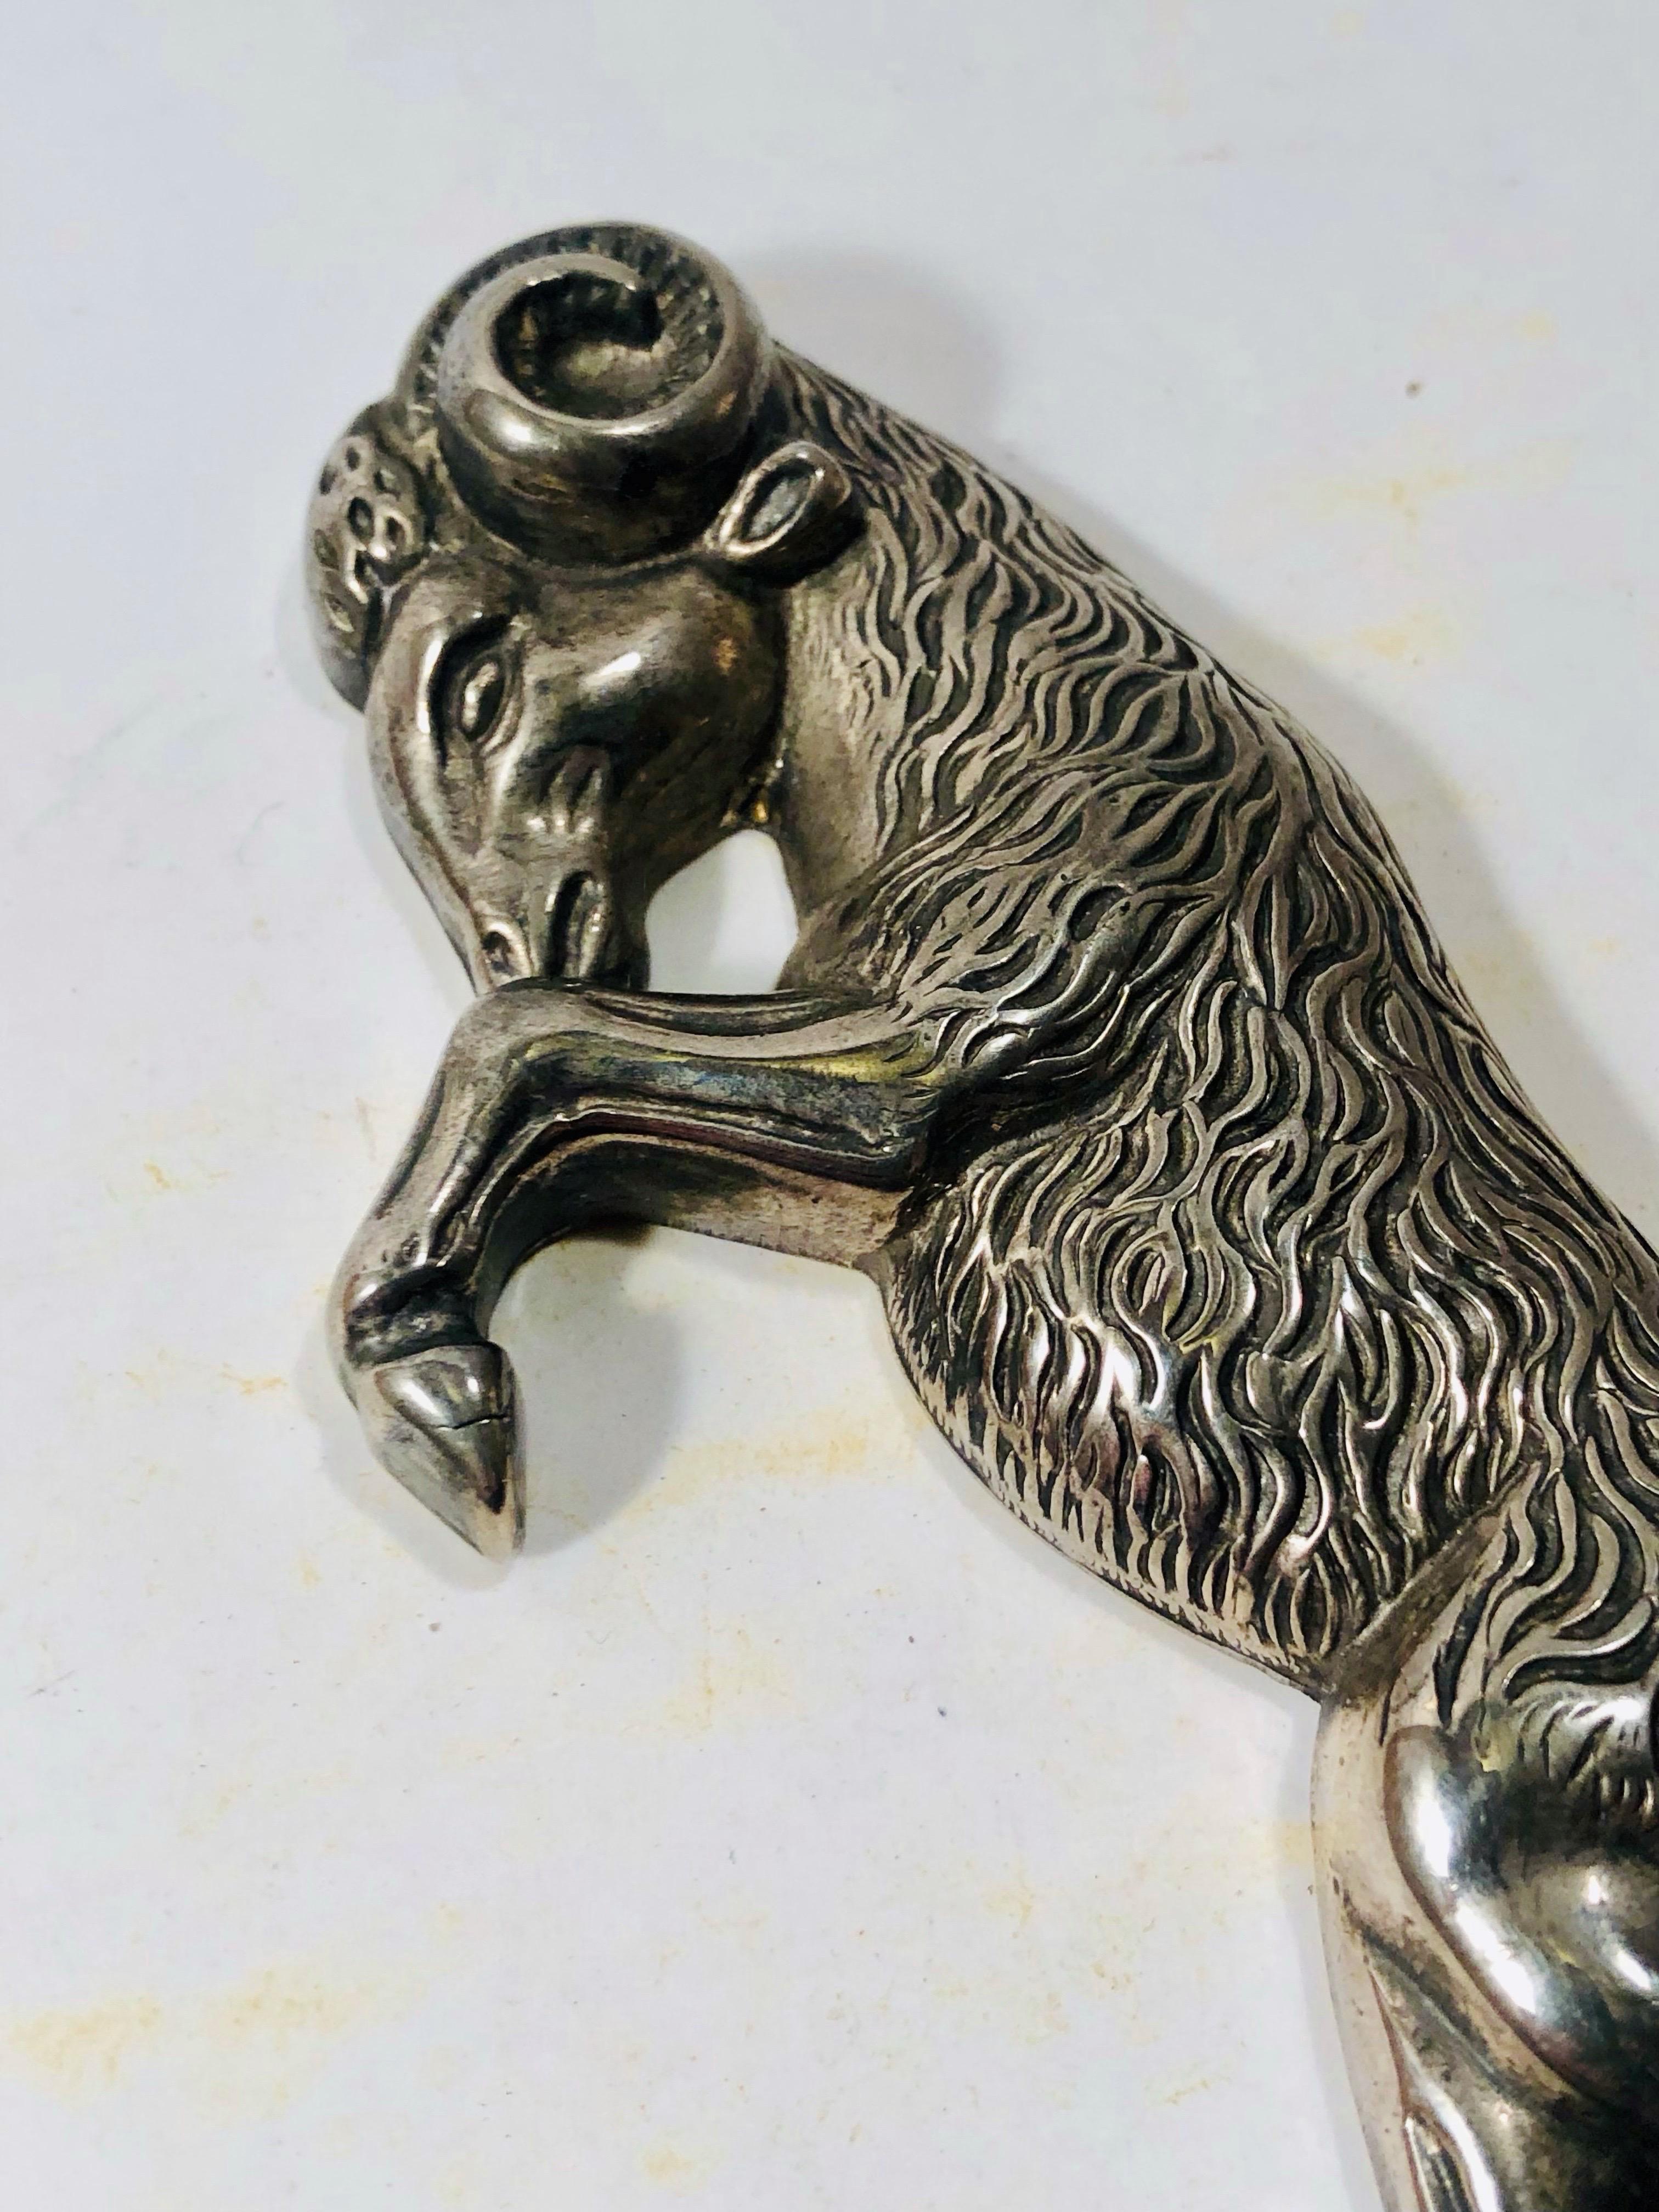 A bottle opener from the 1970s, in silver-plated metal, themed around the signs of the zodiac, depicting the Aries sign.

An item that is both functional and decorative, ideal for collectors or enthusiasts of vintage design and astrology.

Great